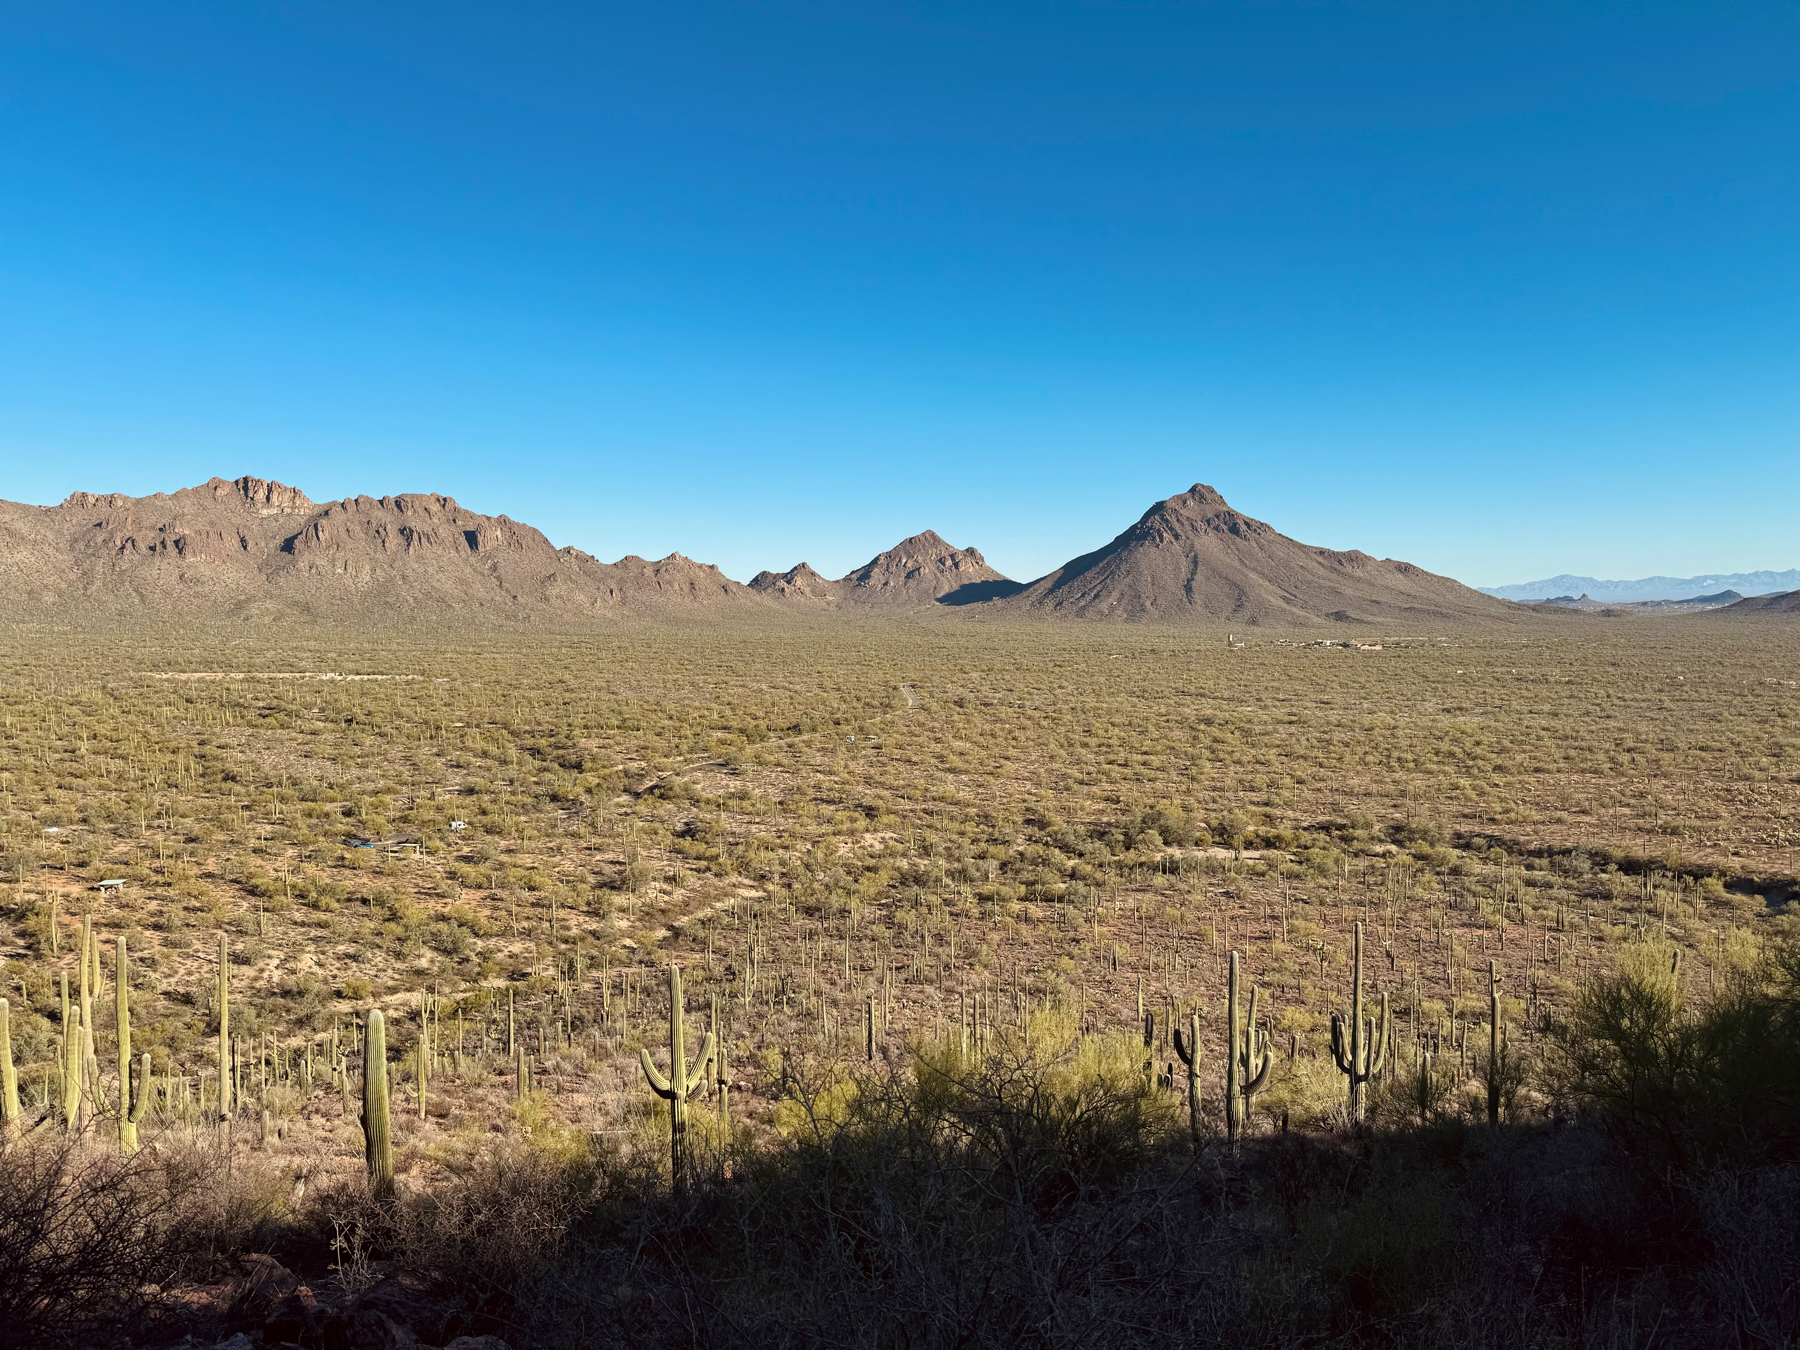 A desert landscape with a range of mountains in the background and a vast expanse covered with saguaro cacti under a clear blue sky.